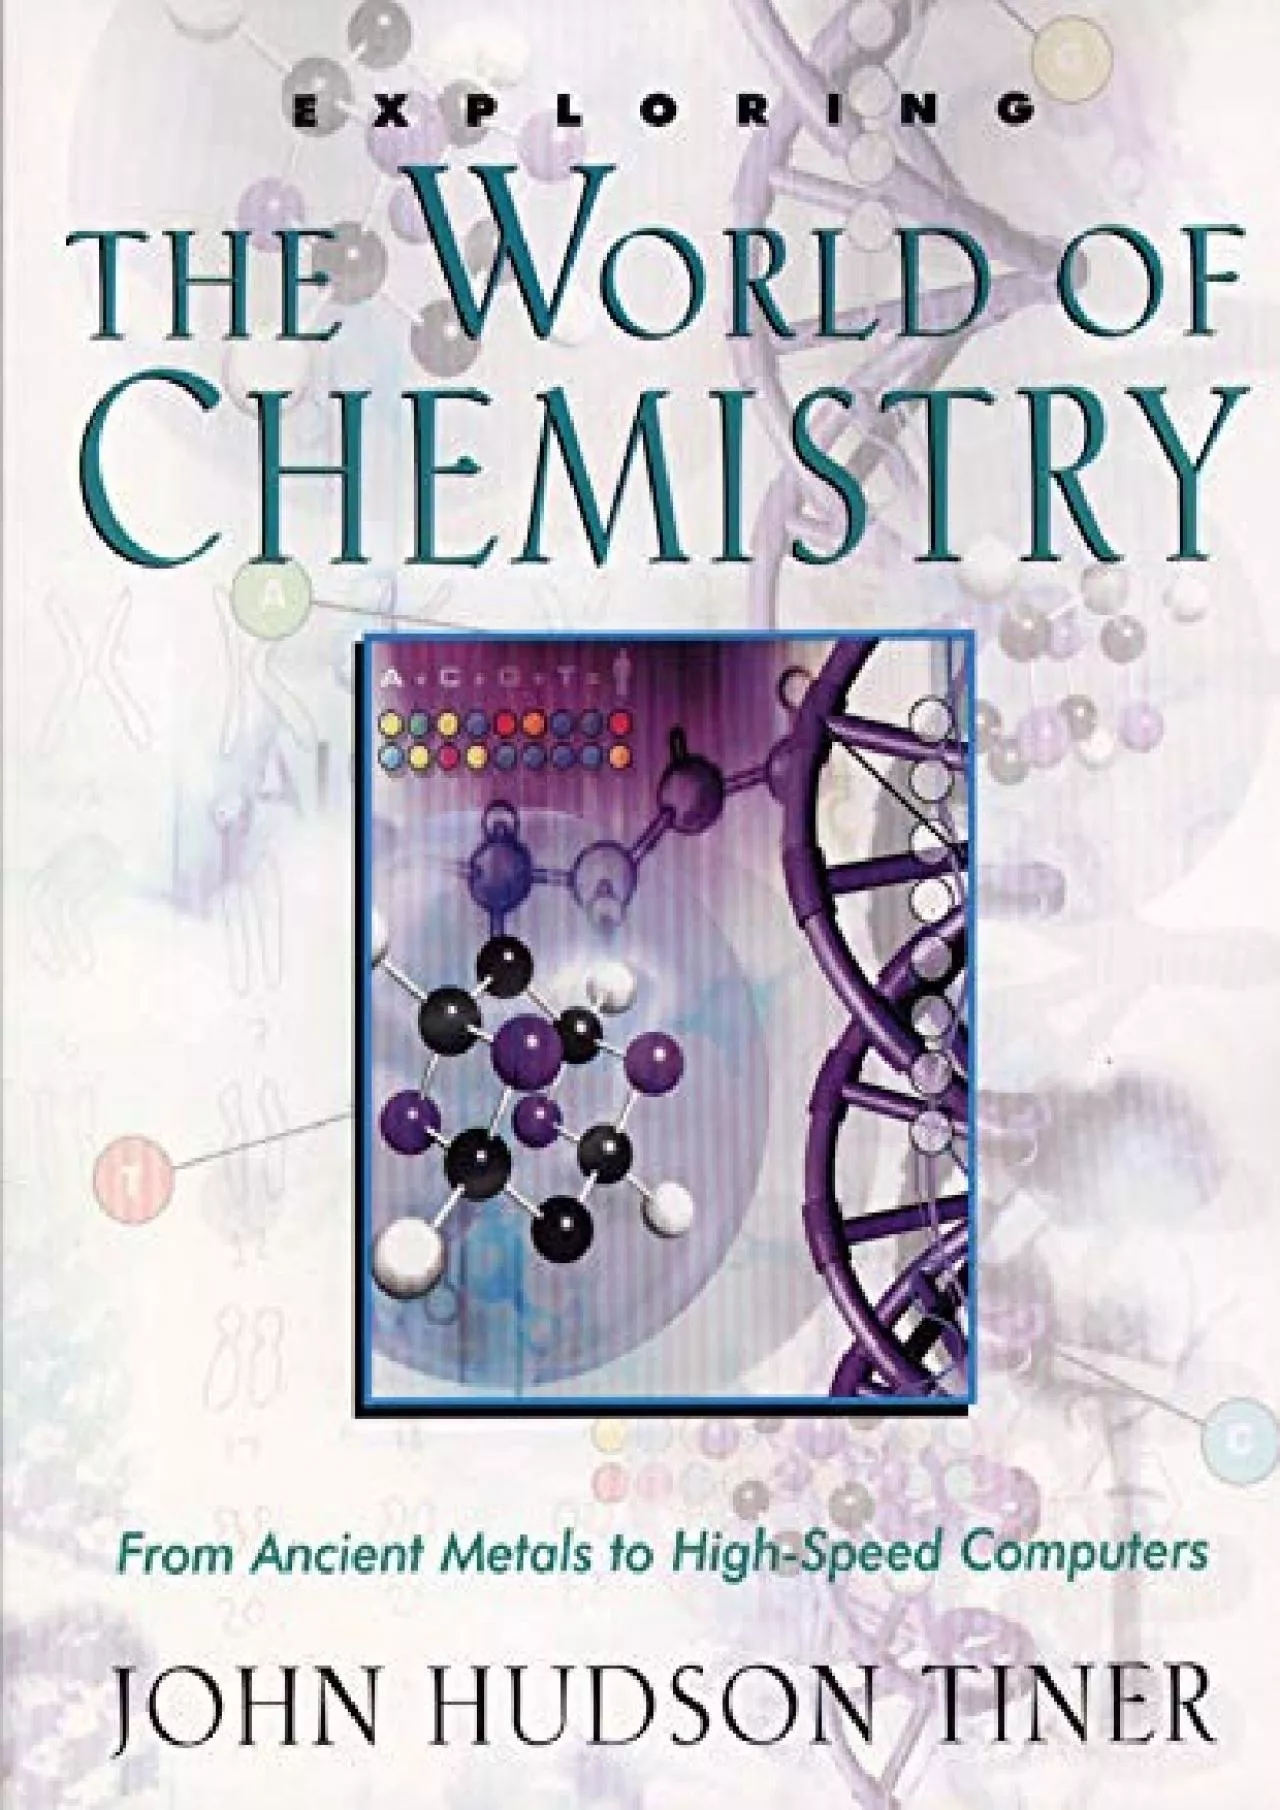 [EBOOK]-Exploring the World of Chemistry: From Ancient Metals to High-Speed Computers